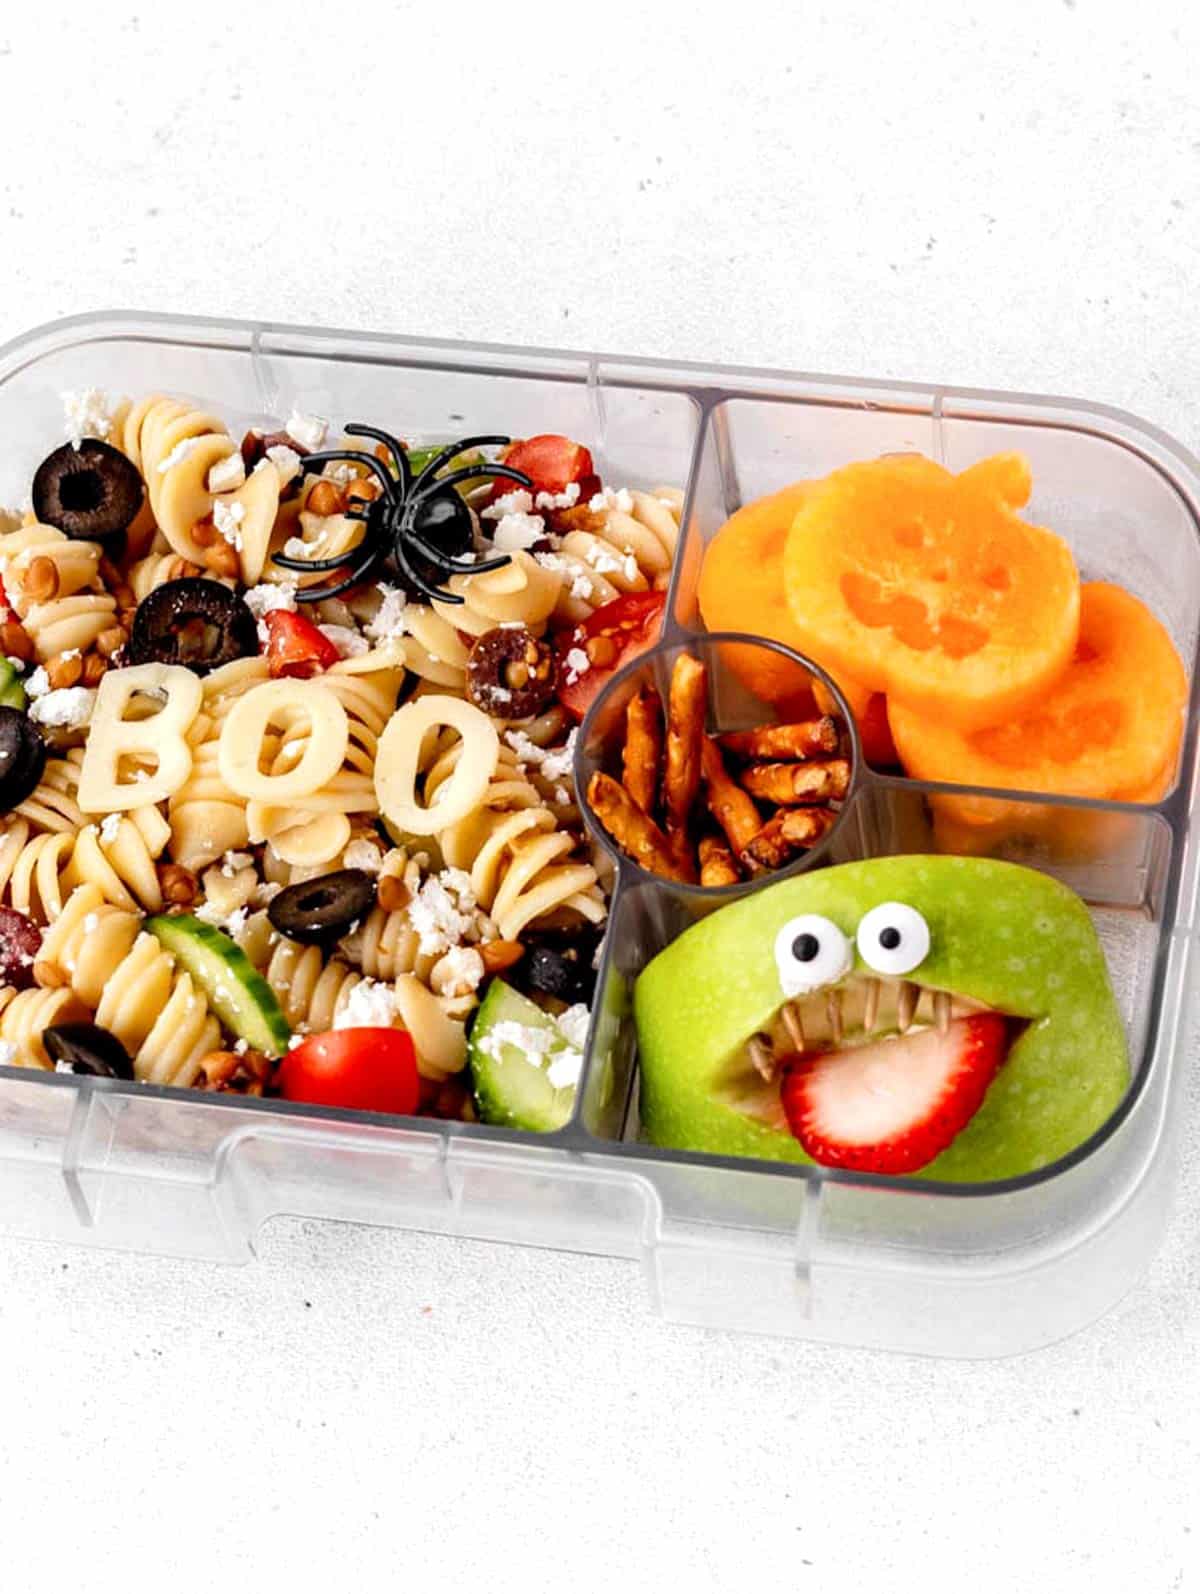 Cantaloupe pumpkins, apple monster and Halloween pasta salad in a lunch container.